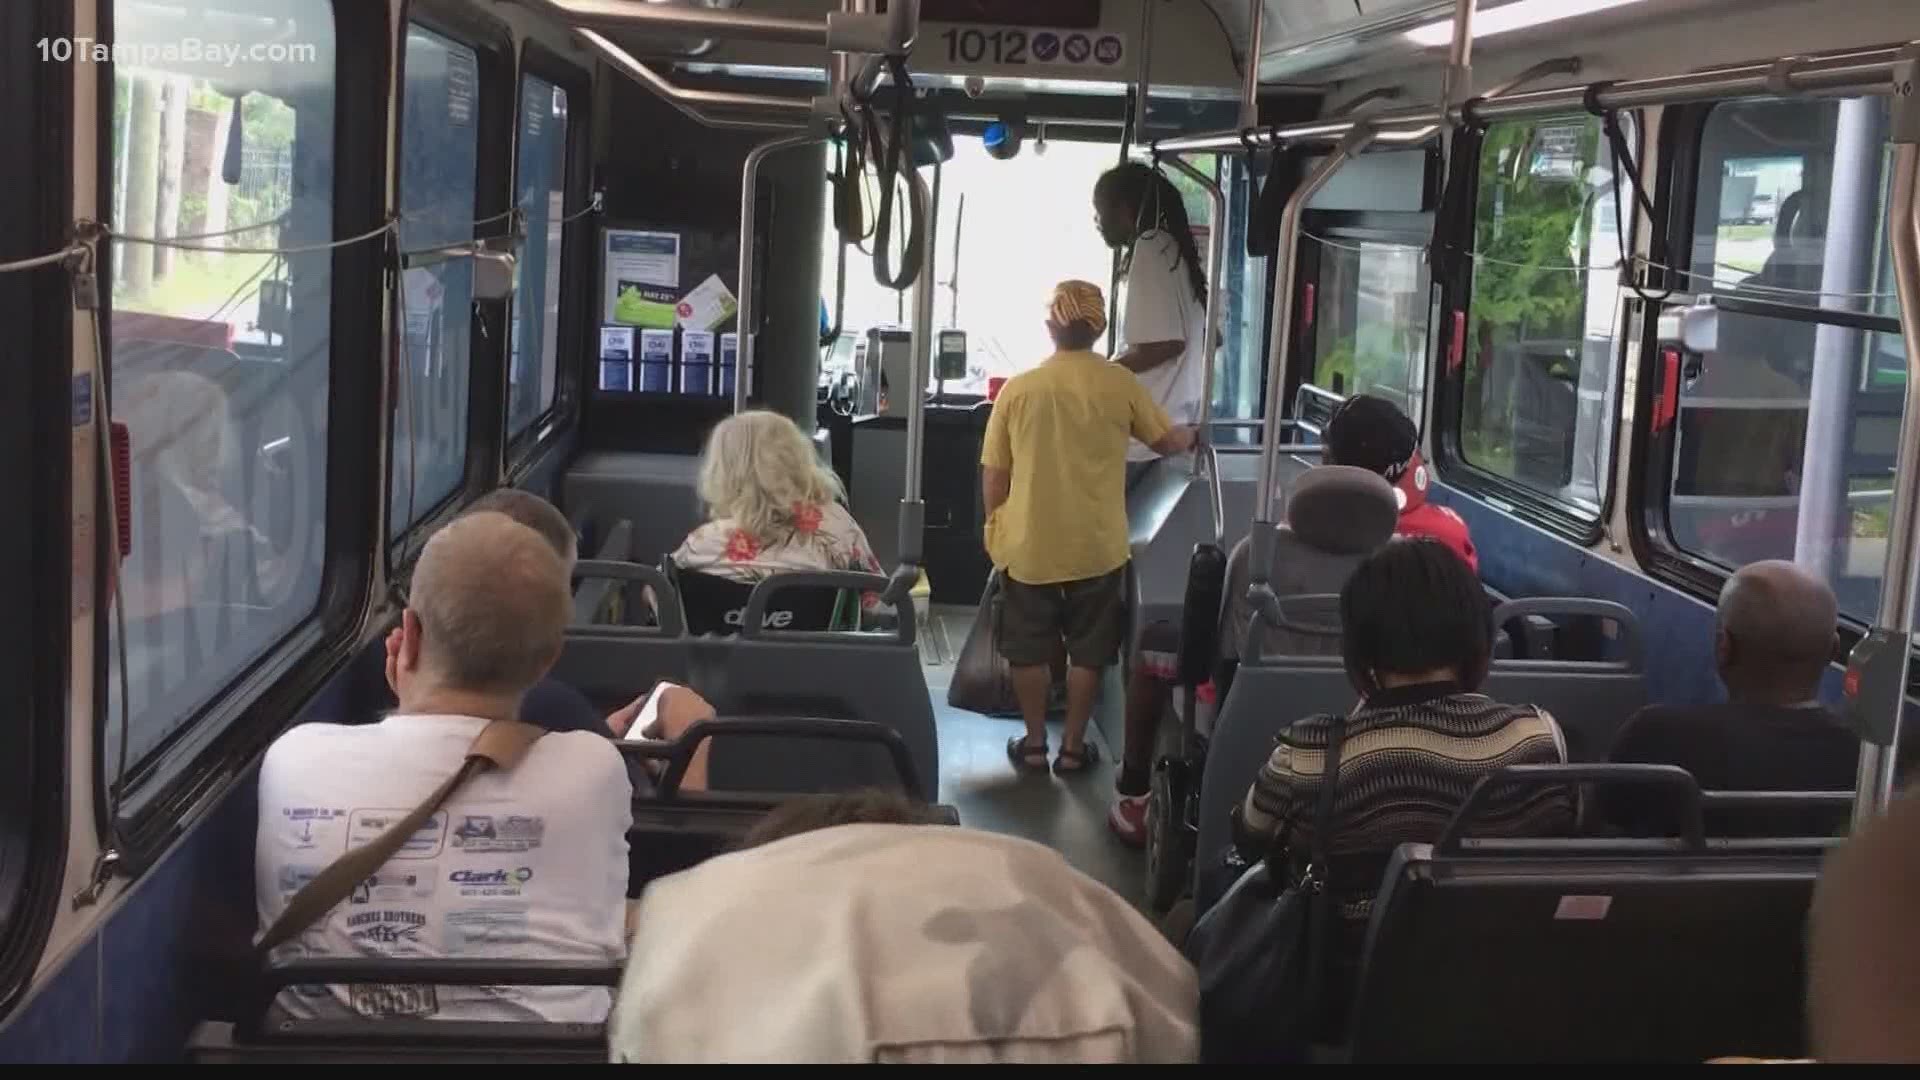 With not many driving, even less are taking public transportation across Tampa Bay. With riders or not, cleaning continues in buses and trolleys.